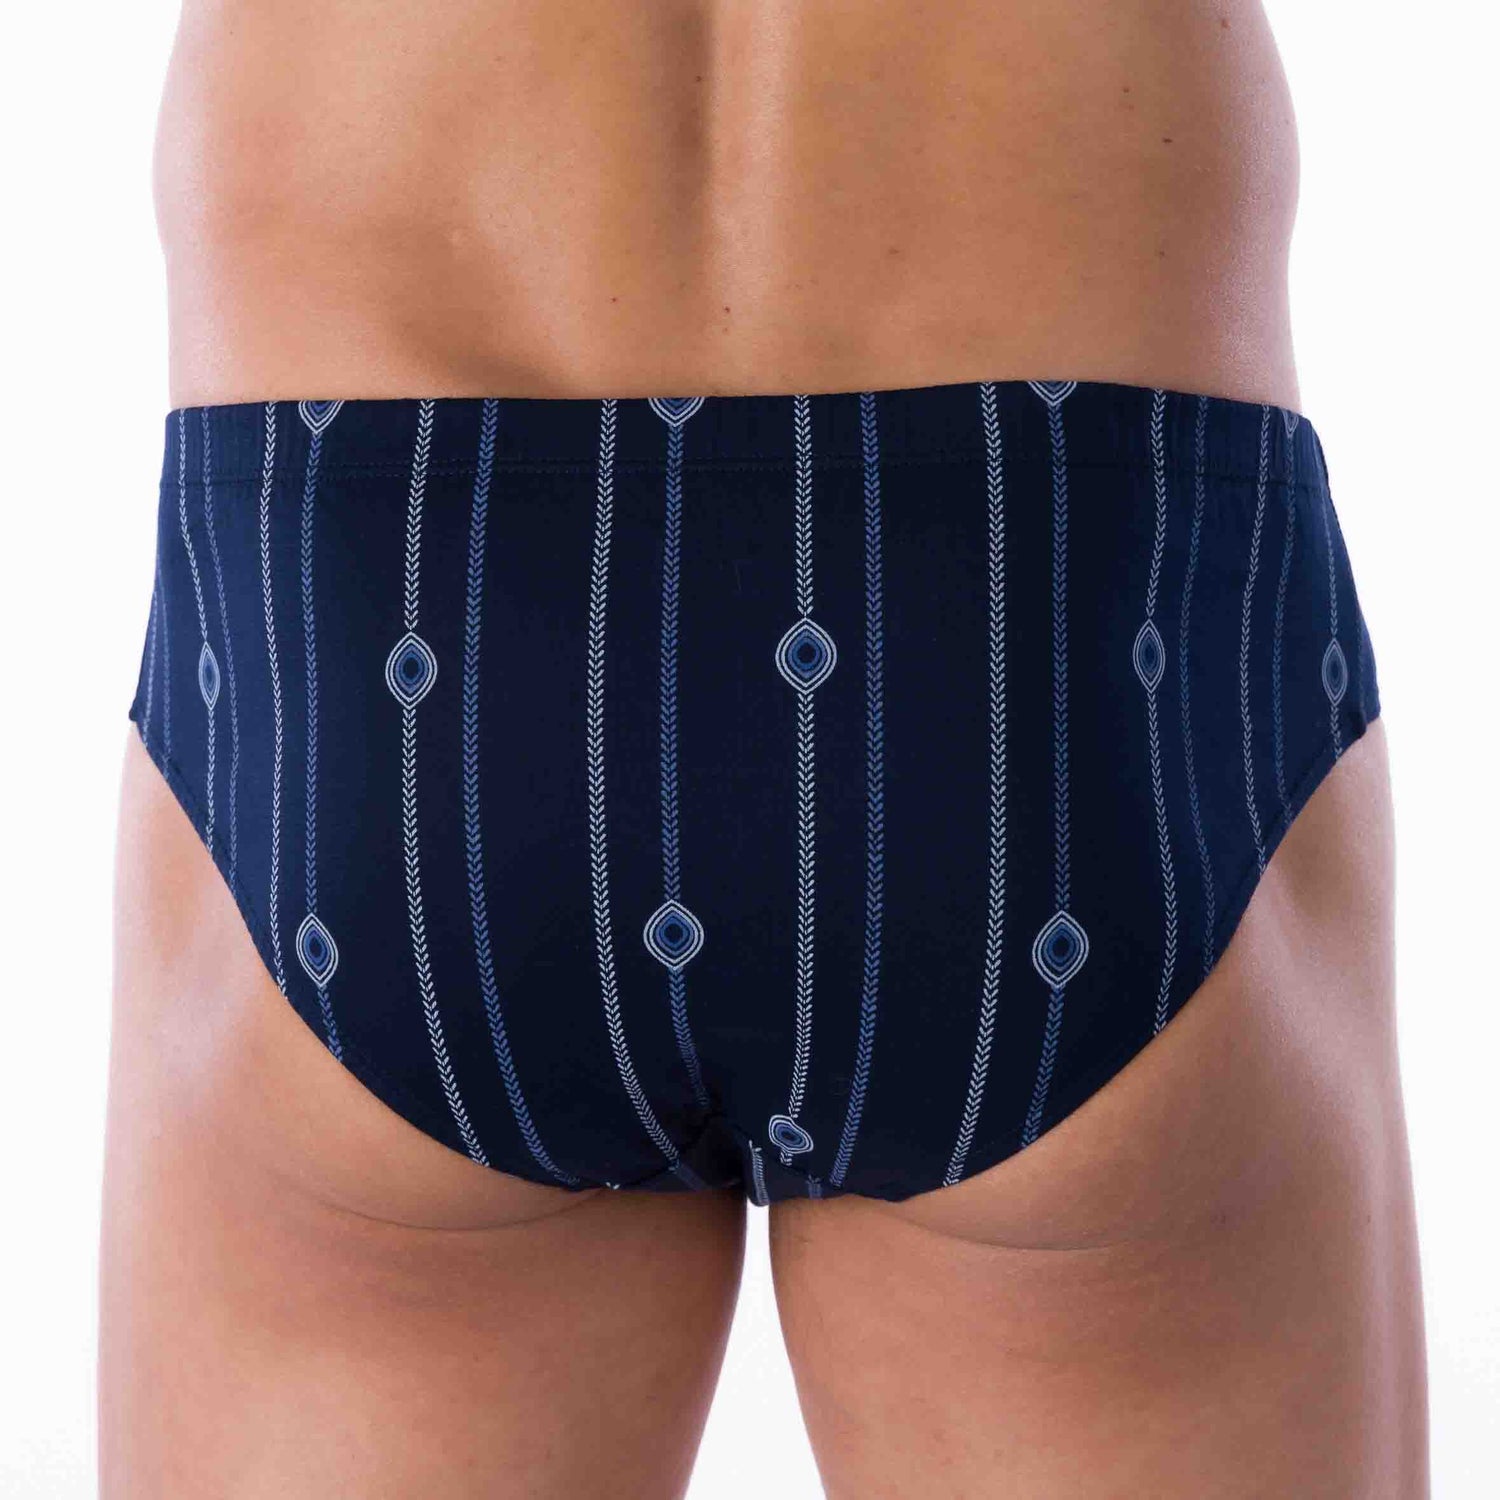 Pack of 2 Low-Rise Briefs in Petrol BLUE and NAVY Printed Mercerized Cotton Jersey